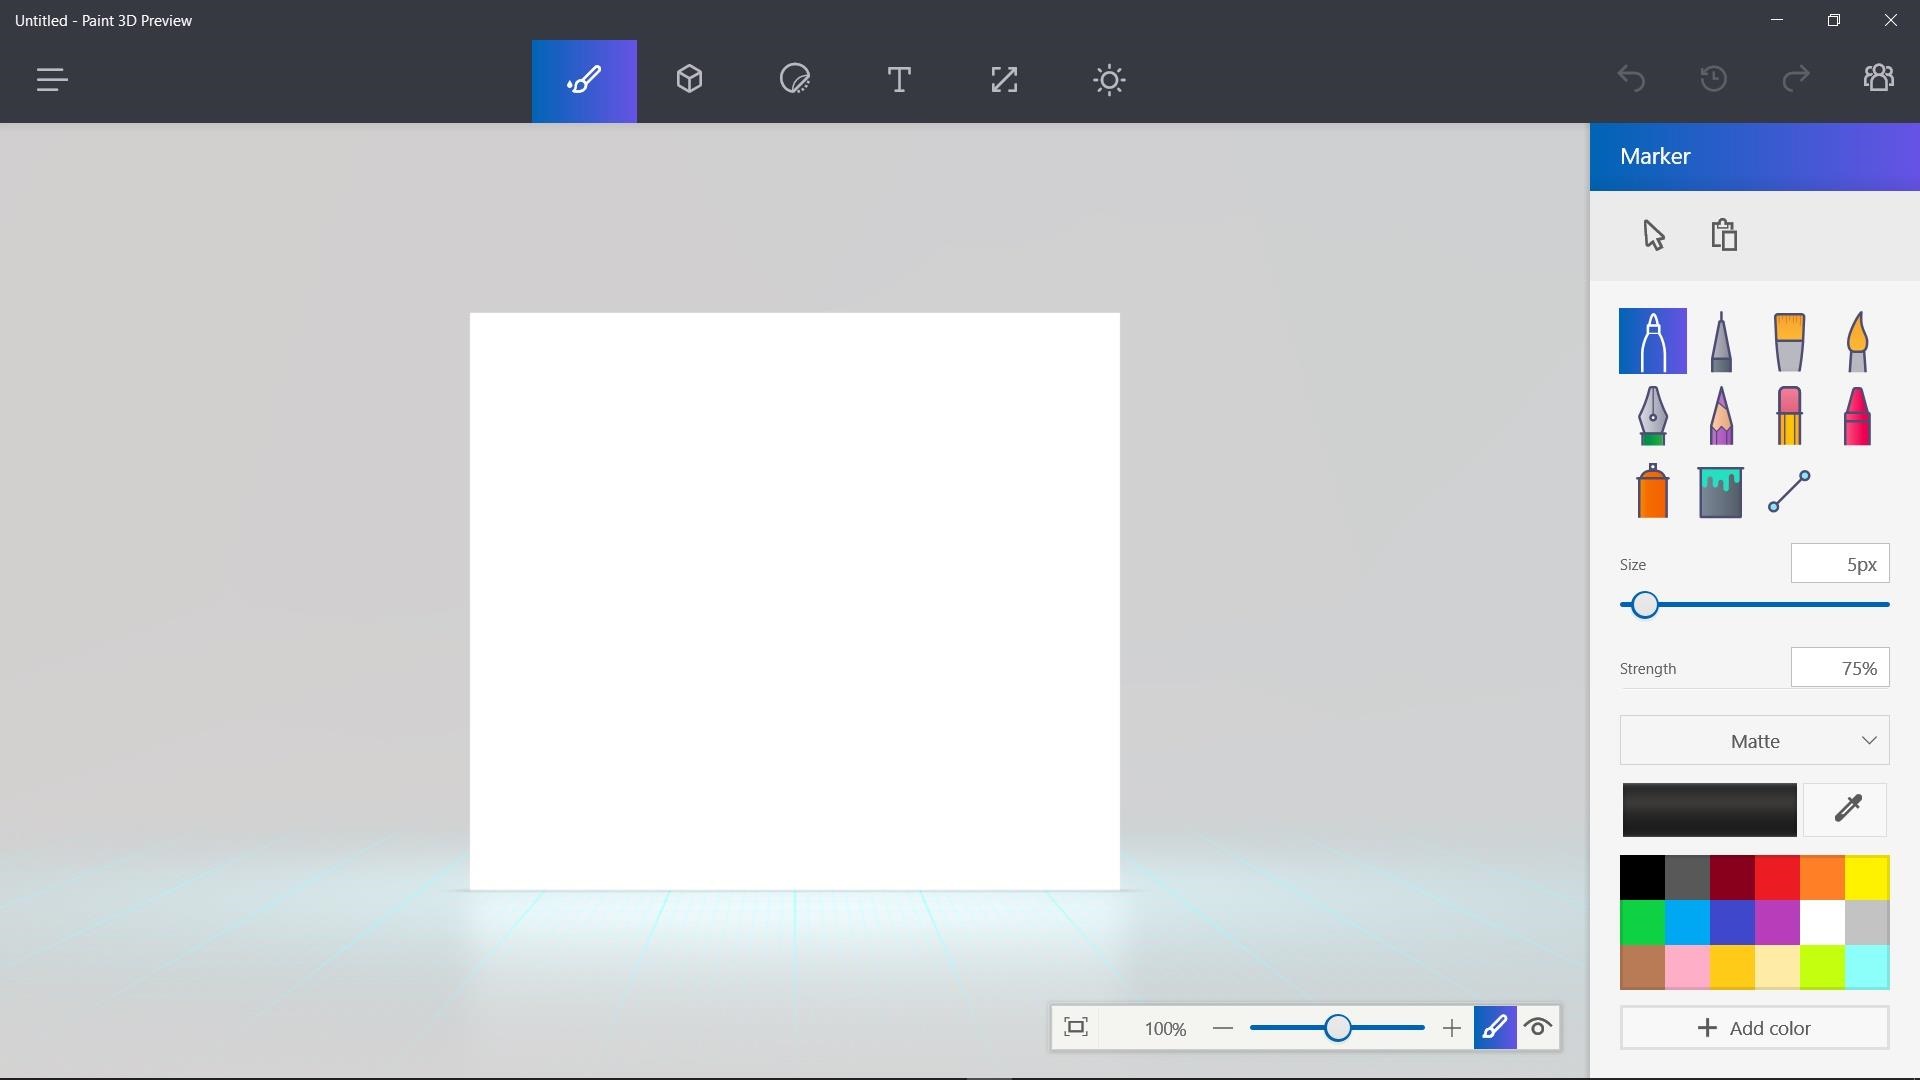 The simple looking interface of Microsoft Paint 3D. Image via NextReality.